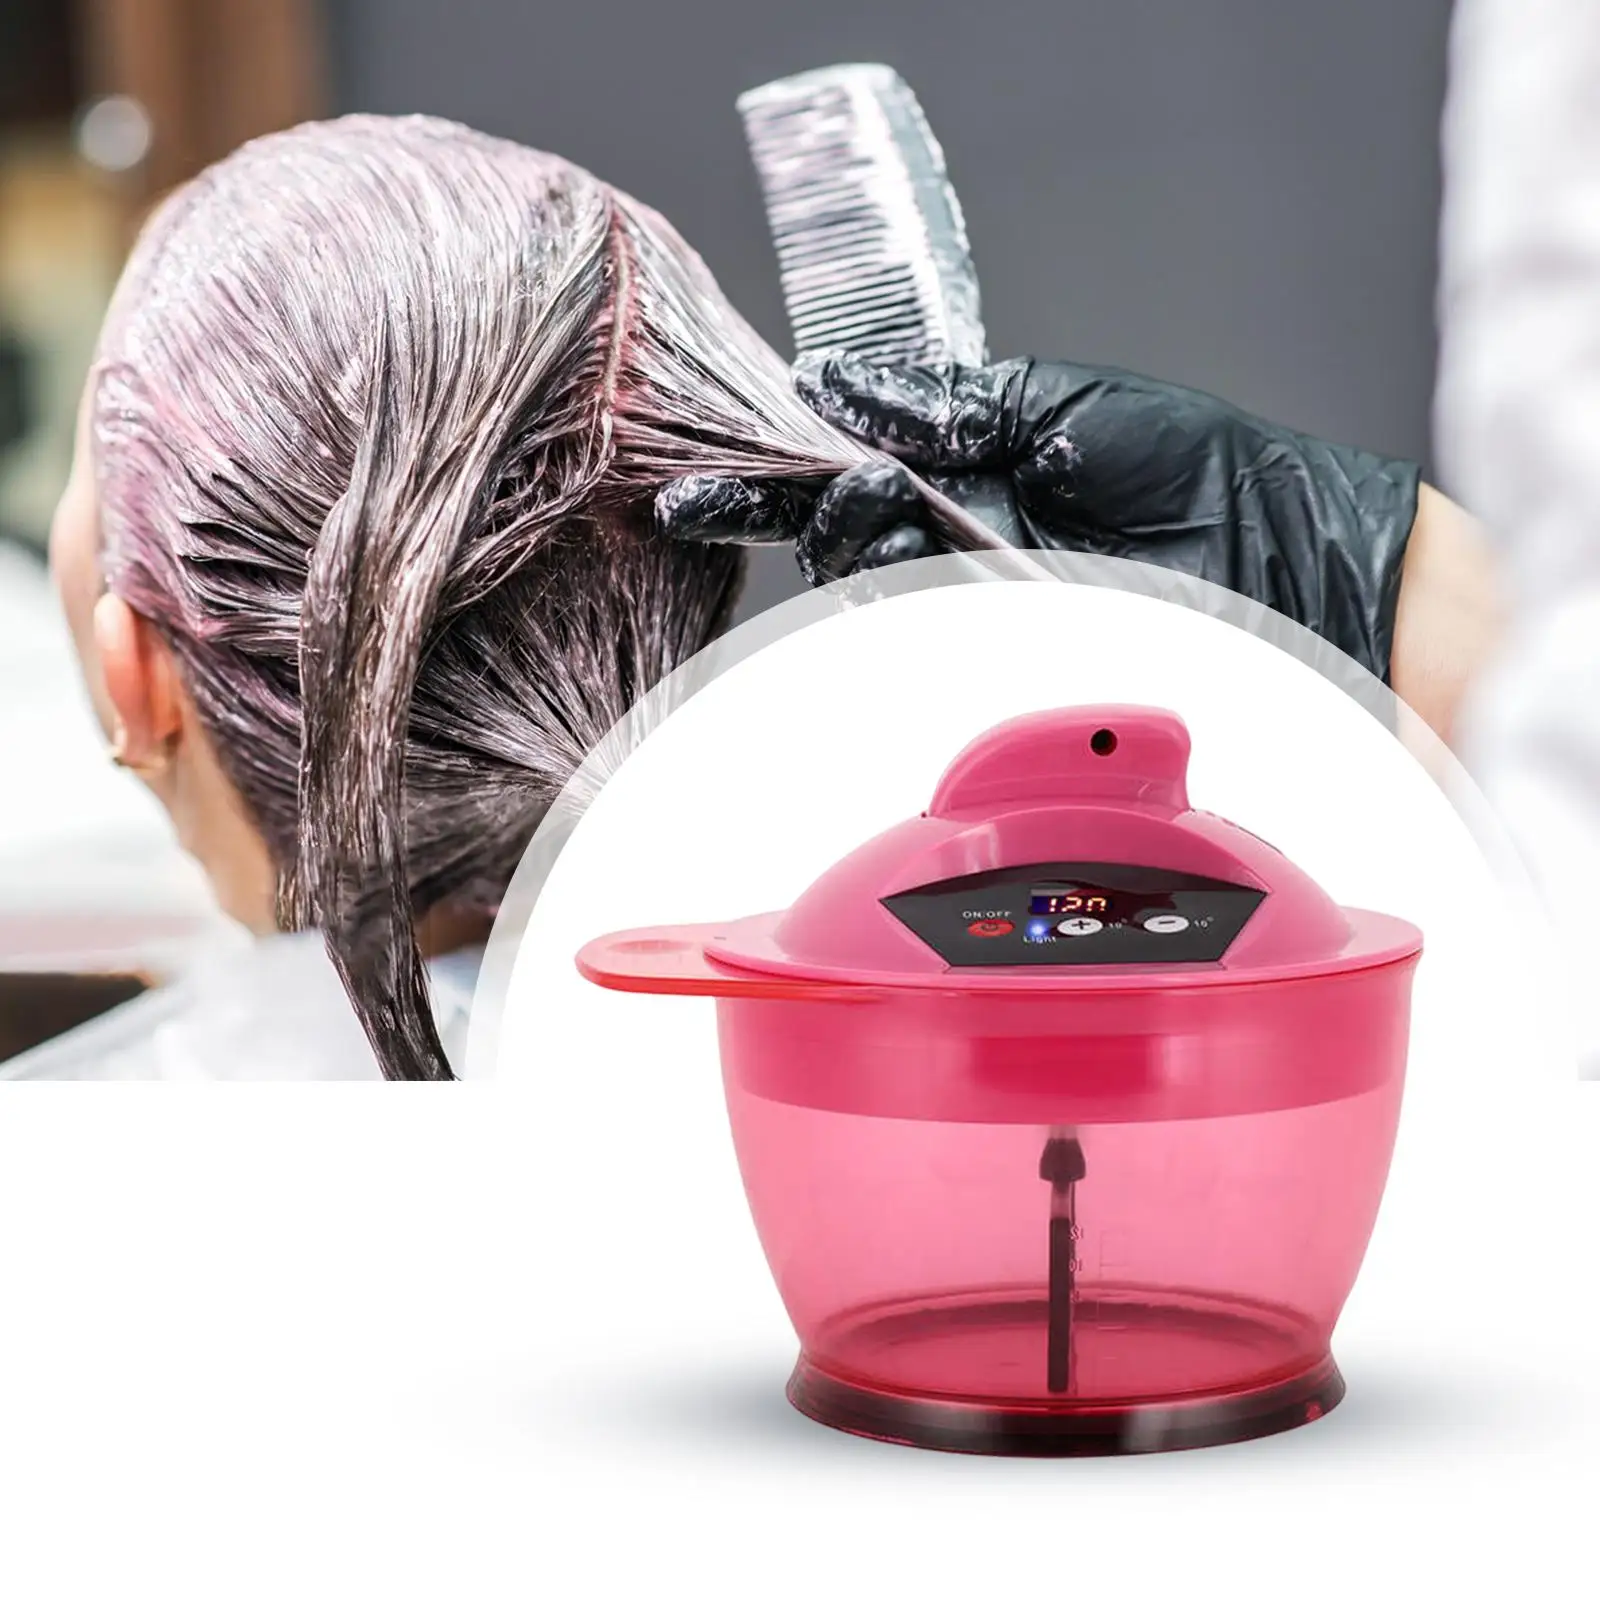 Electric Dyestuff Mixer Mixing Bowl Color Portable Dyeing Hair Dyeing Tool Hairdressing Device for Hair Coloring Barber Shop